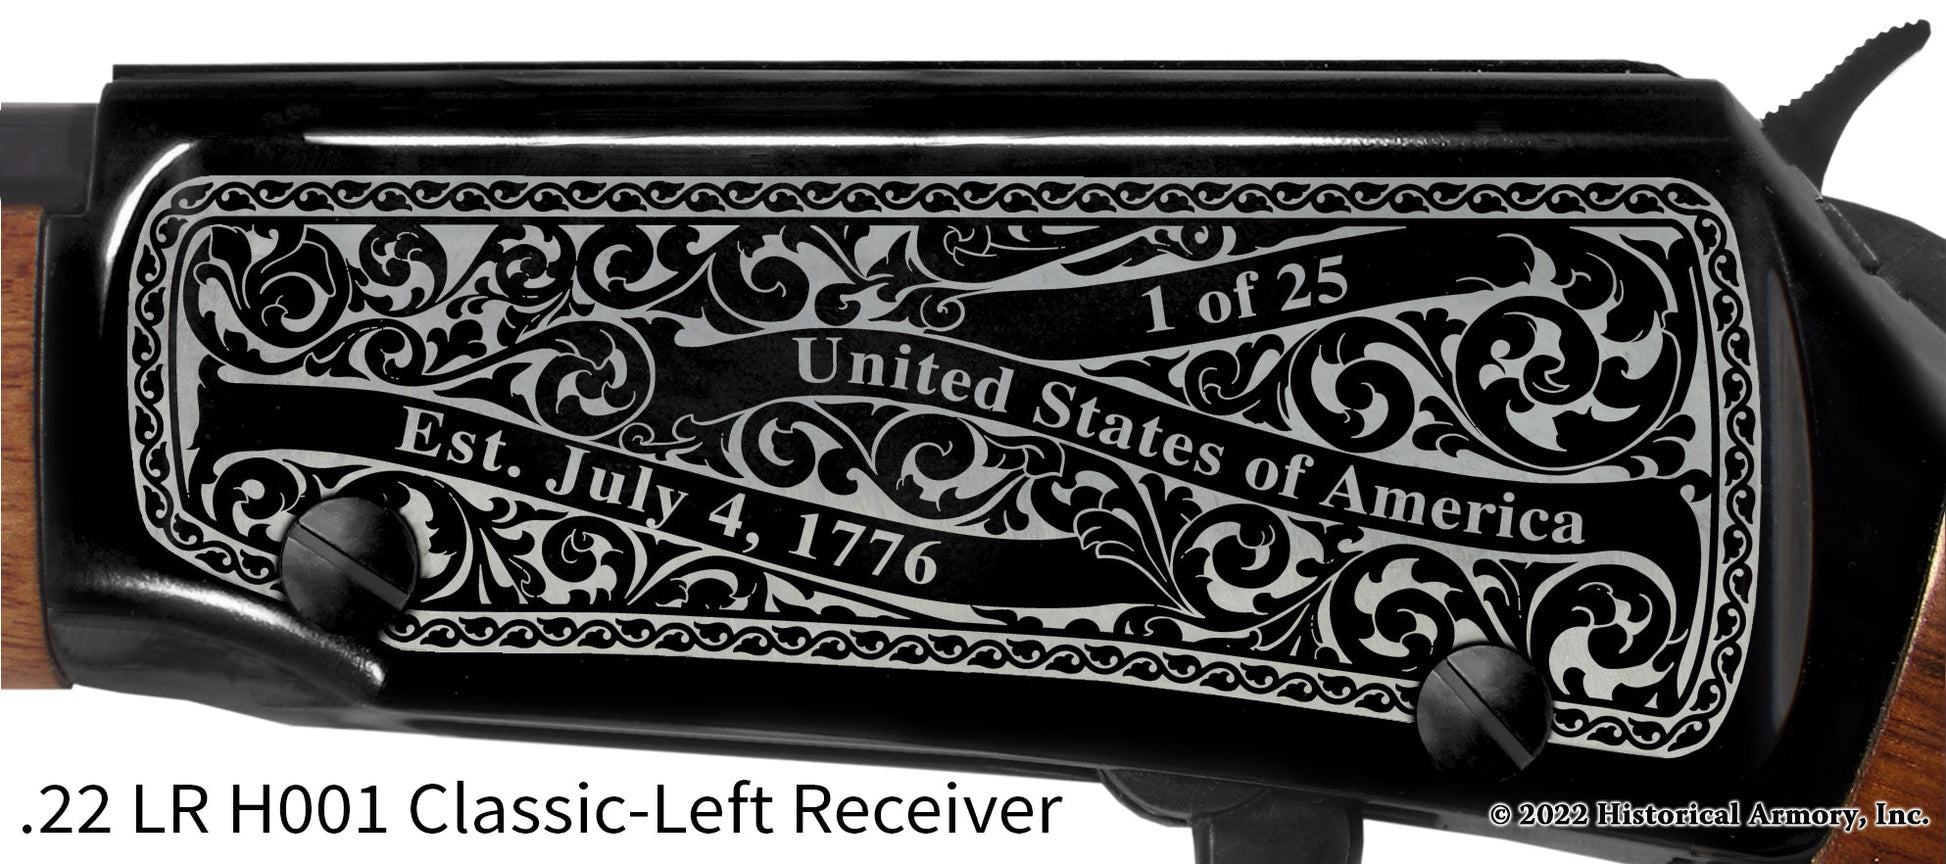 Tyler County West Virginia Engraved Henry H001 Rifle